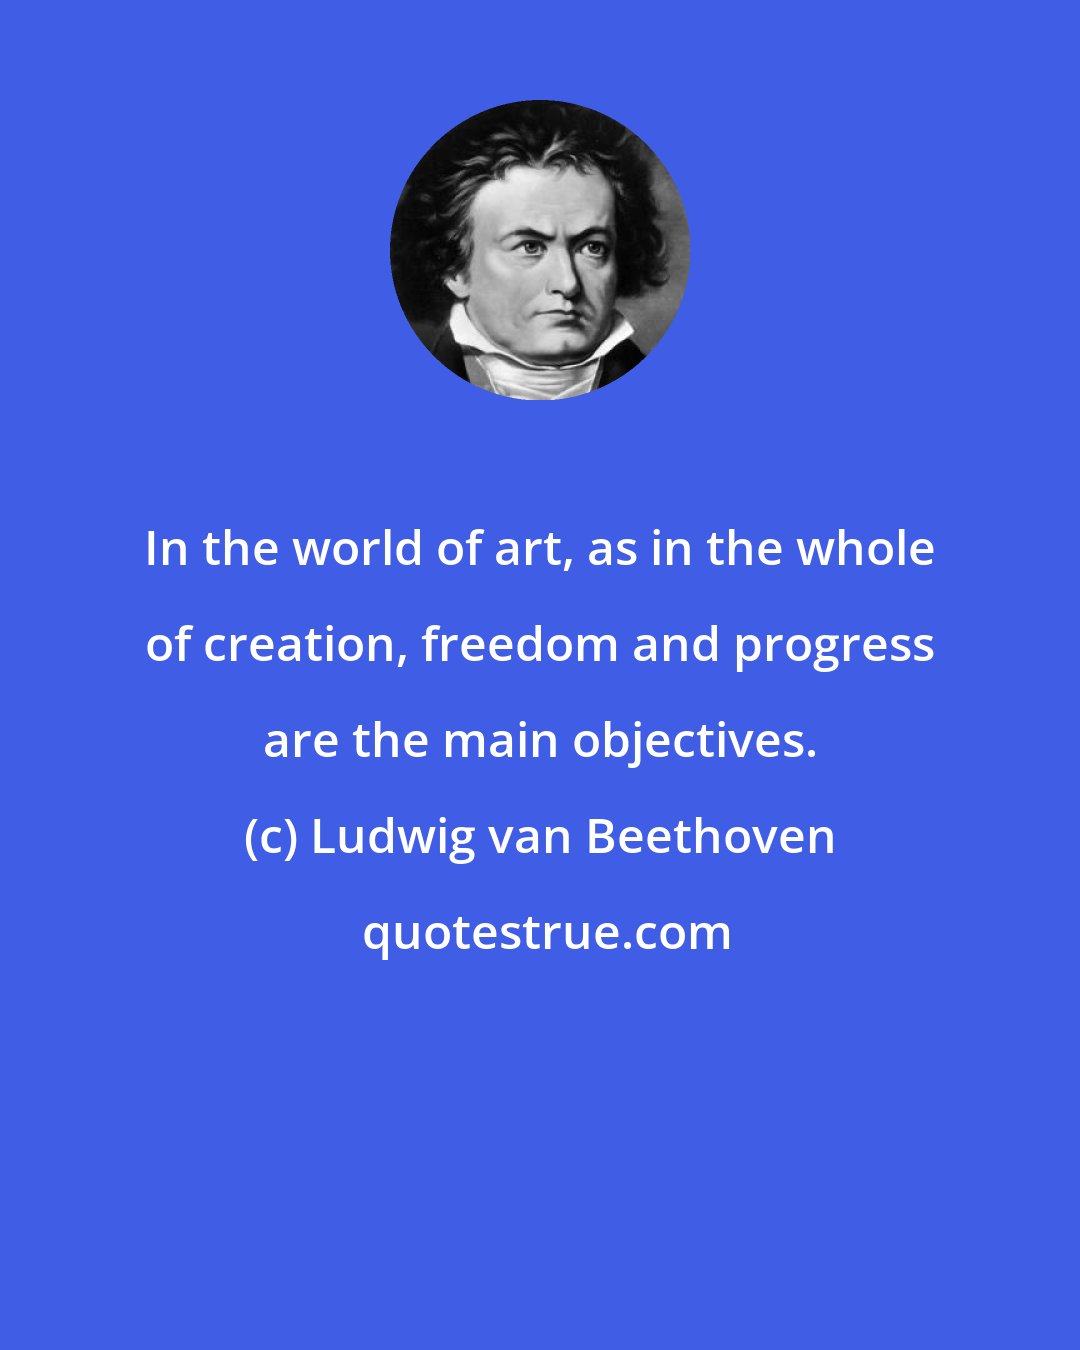 Ludwig van Beethoven: In the world of art, as in the whole of creation, freedom and progress are the main objectives.